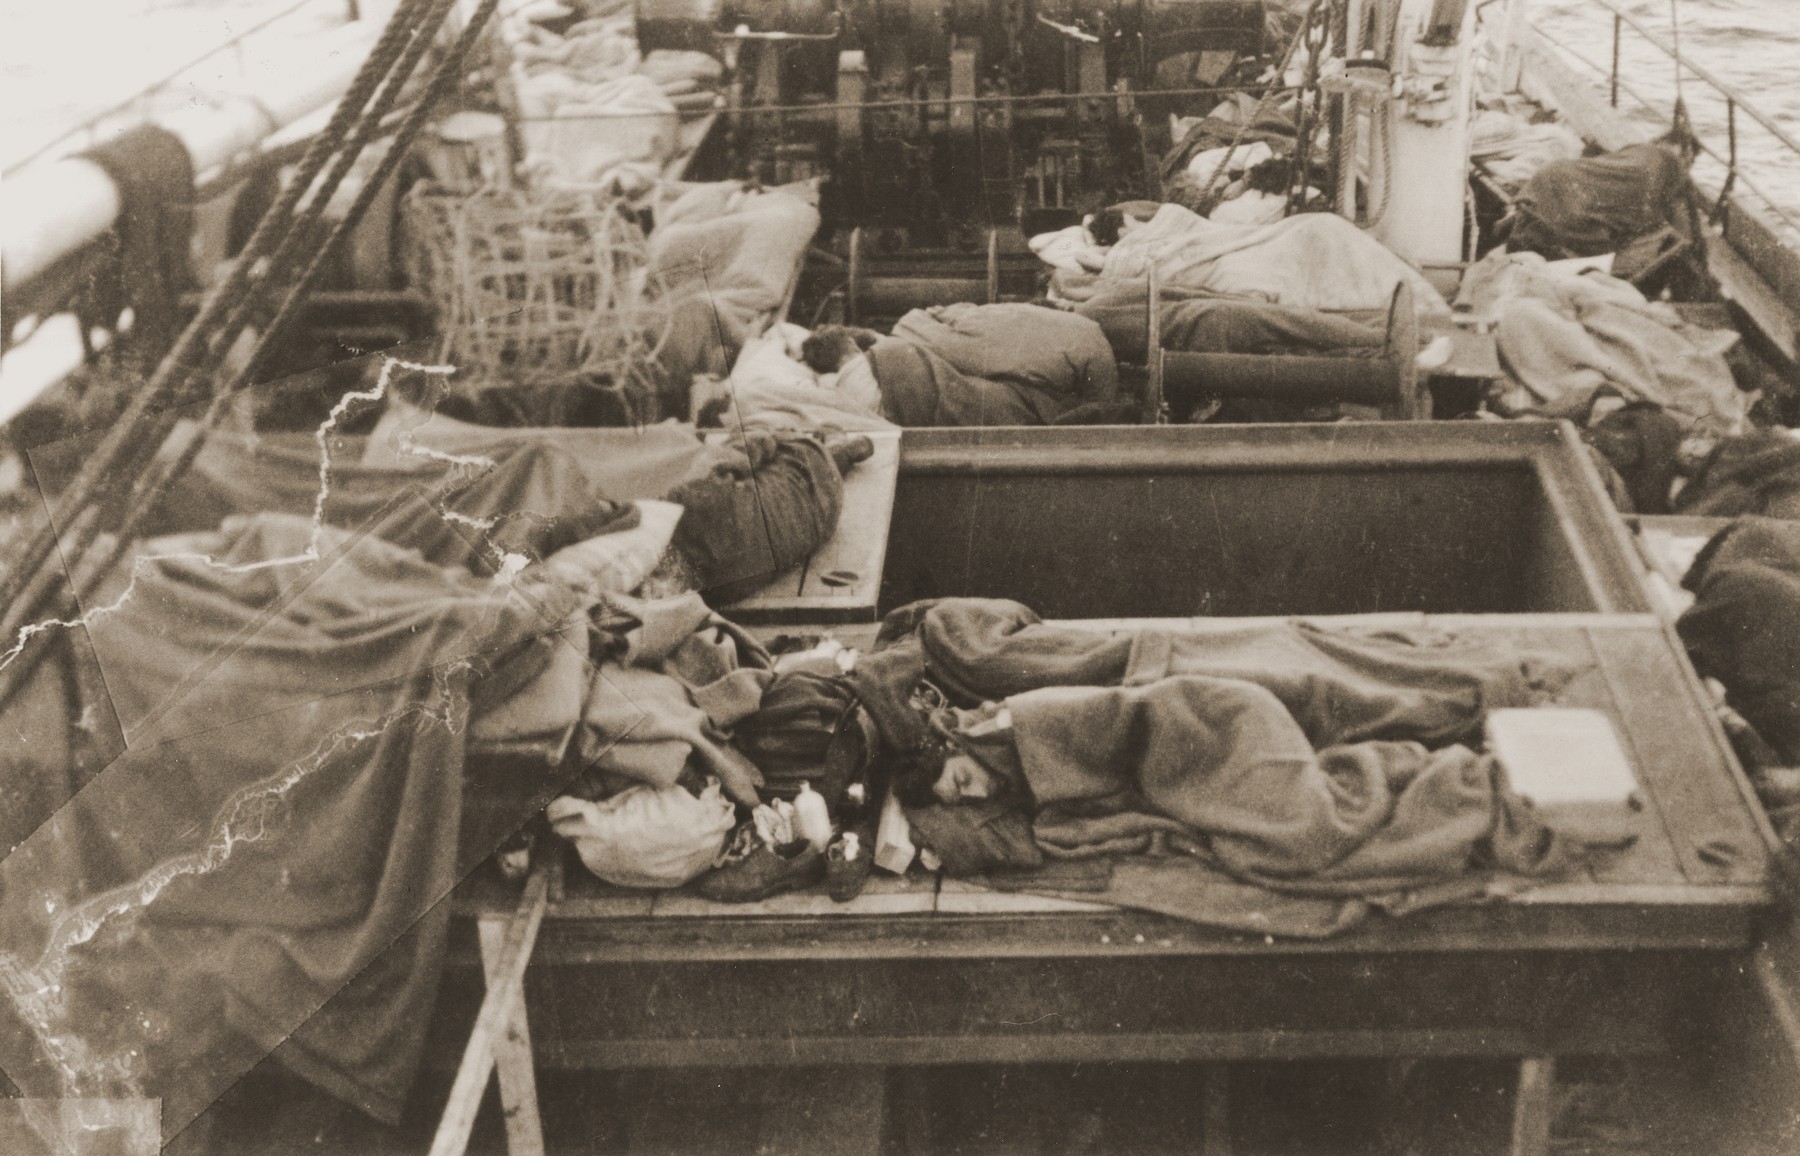 Jewish DPs sleep on the deck of the Mala immigrant ship en route to the new State of Israel.  

Passengers would often come on deck during the night to escape the stench in the hold of the ship.  This photograph was taken just after dawn.